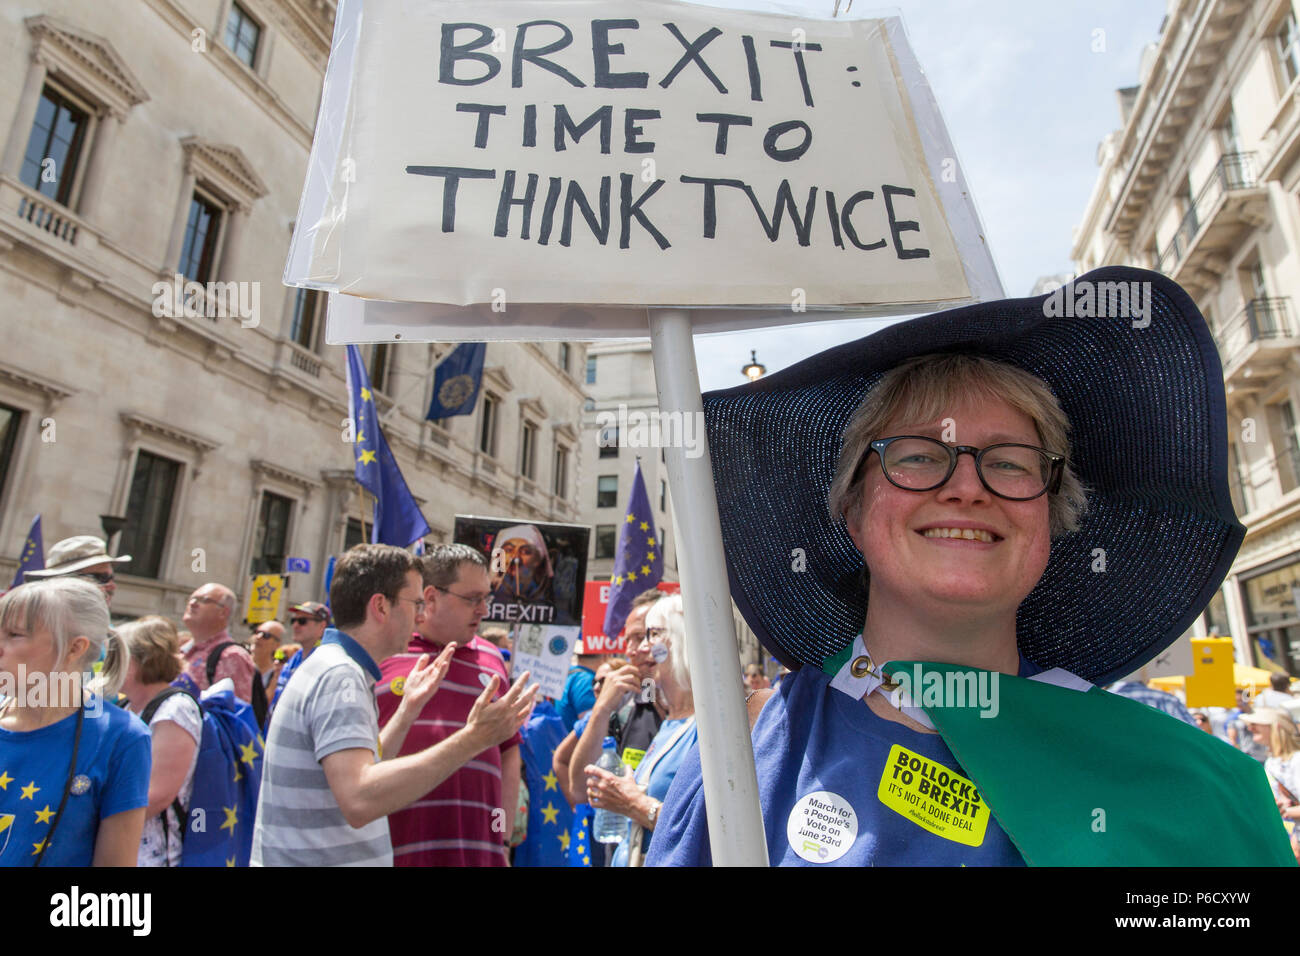 People’s Vote anti-Brexit protest: estimated 100,000 march to Parliament Square on 23rd June 2018, two years after the Brexit referendum  vote. Stock Photo